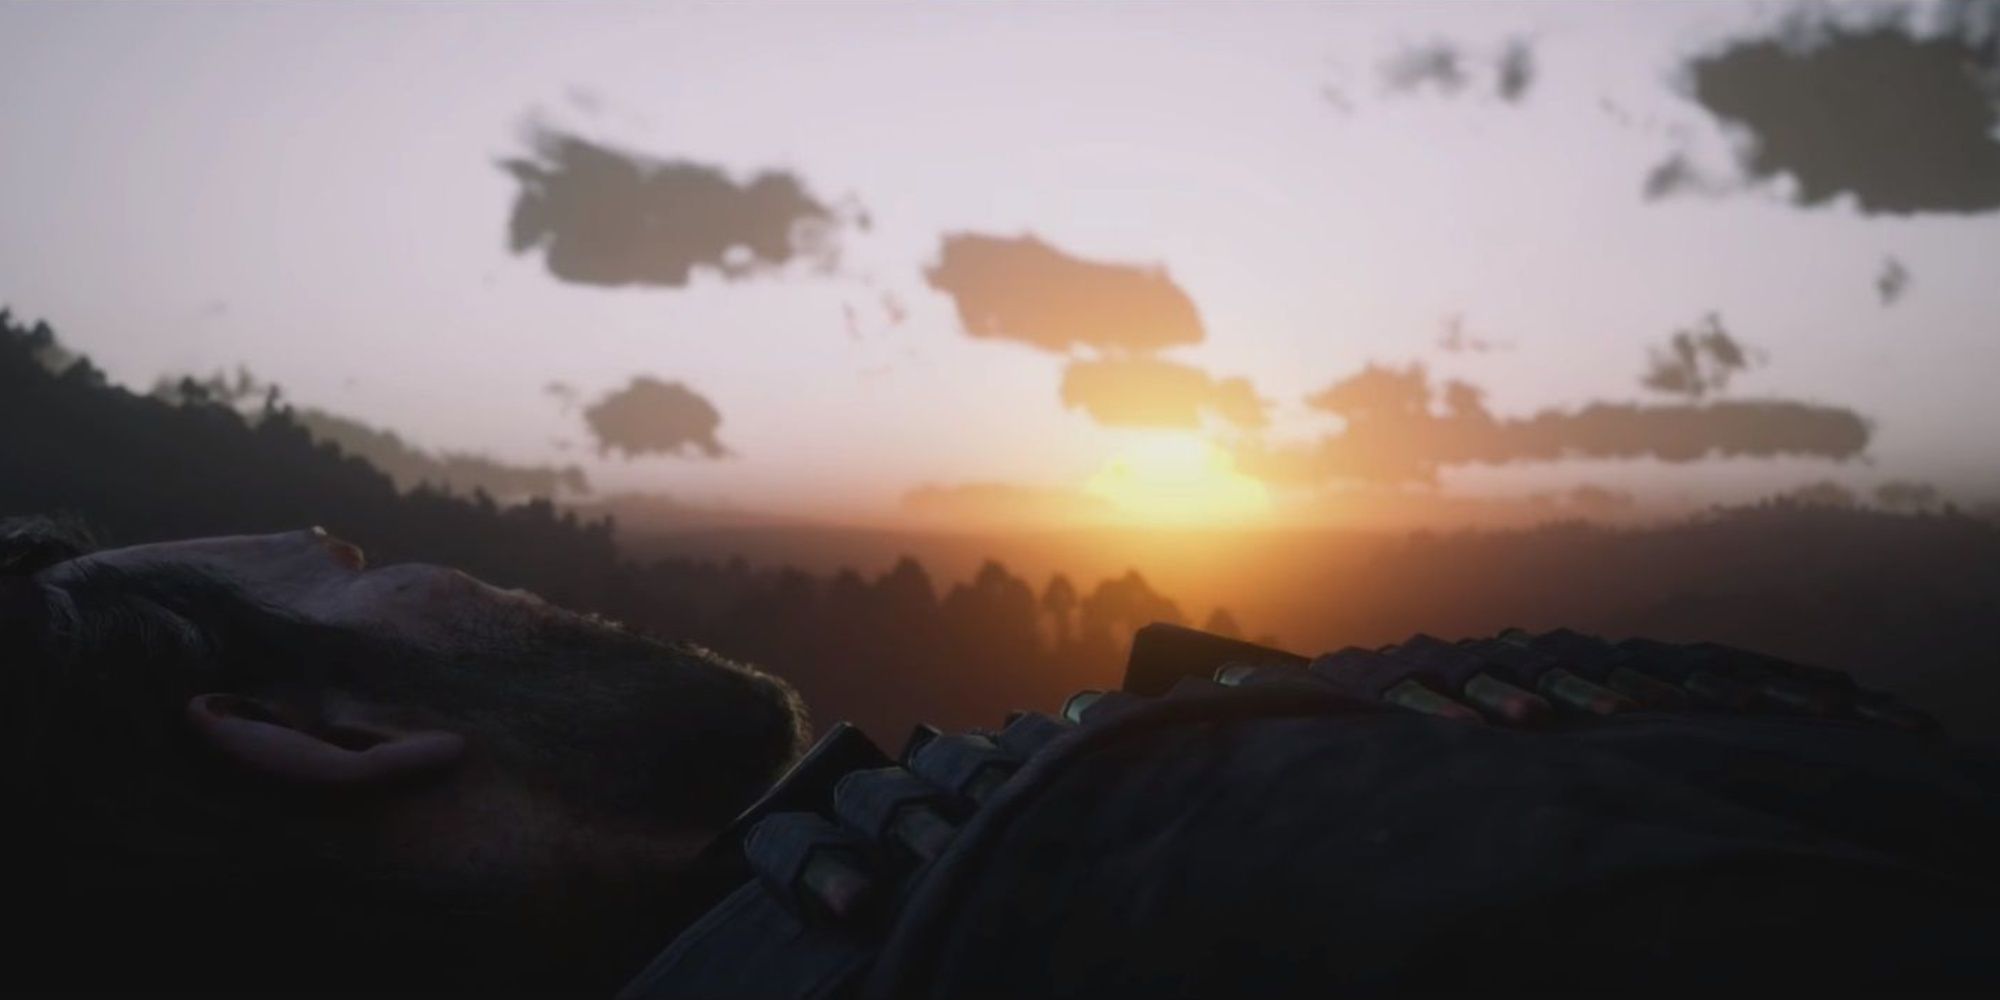 Red Dead Redemption 2 Screenshot Of Arthur Looking At The Sunset While He Dies